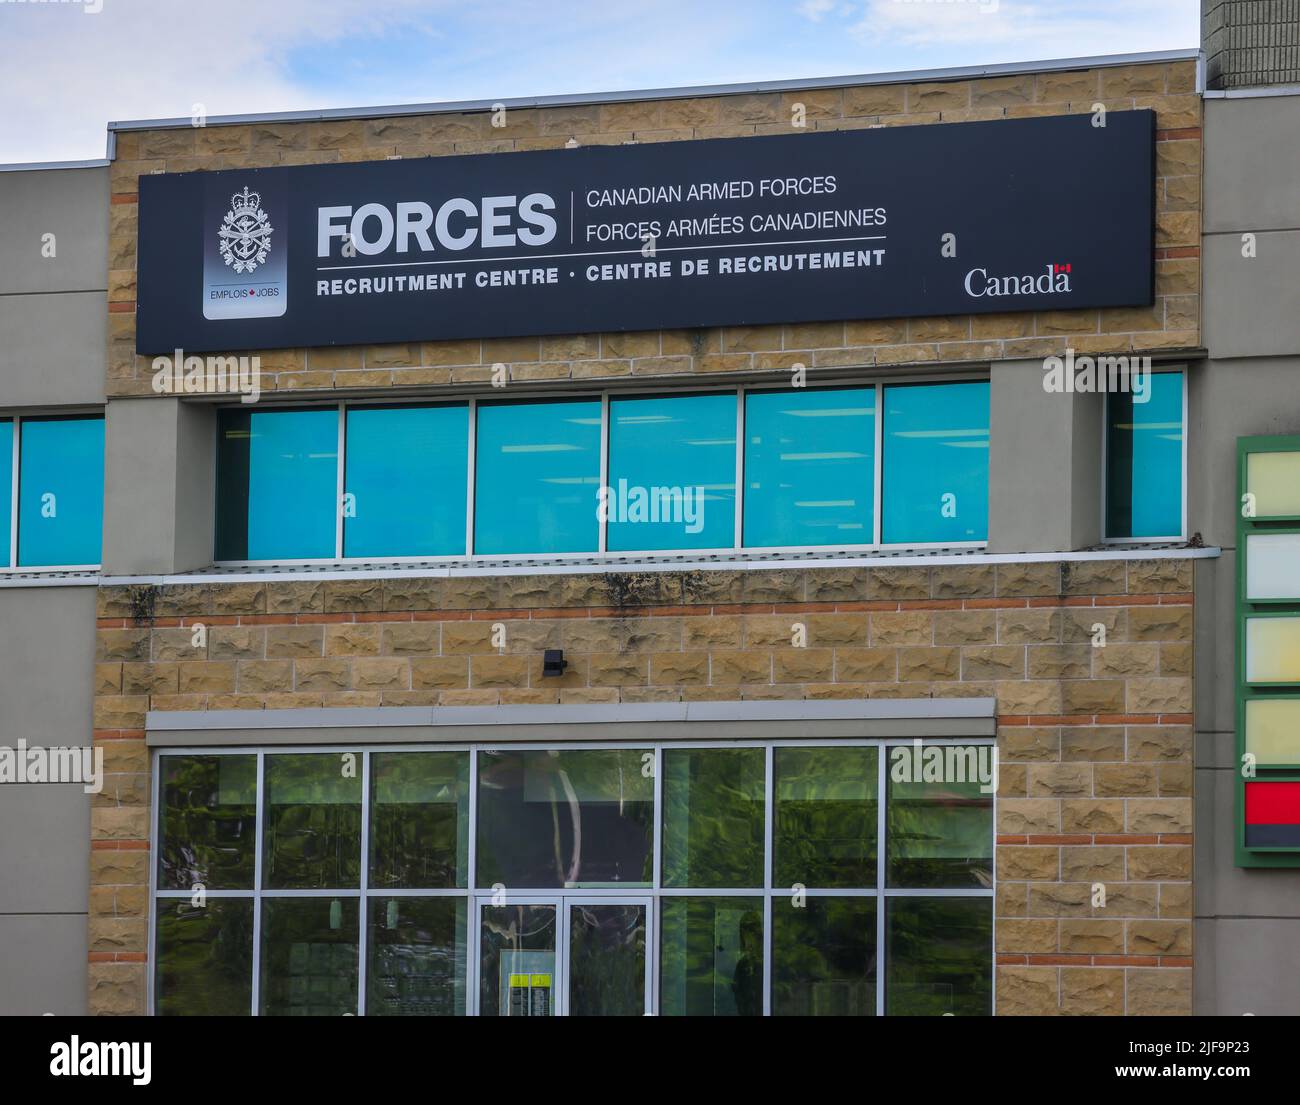 Canadian Armed Forces (CAF) Recruitment center at Halifax, Nova Scotia. CAF is the unified military of Canada. HALIFAX, CANADA - JUNE 2022 Stock Photo